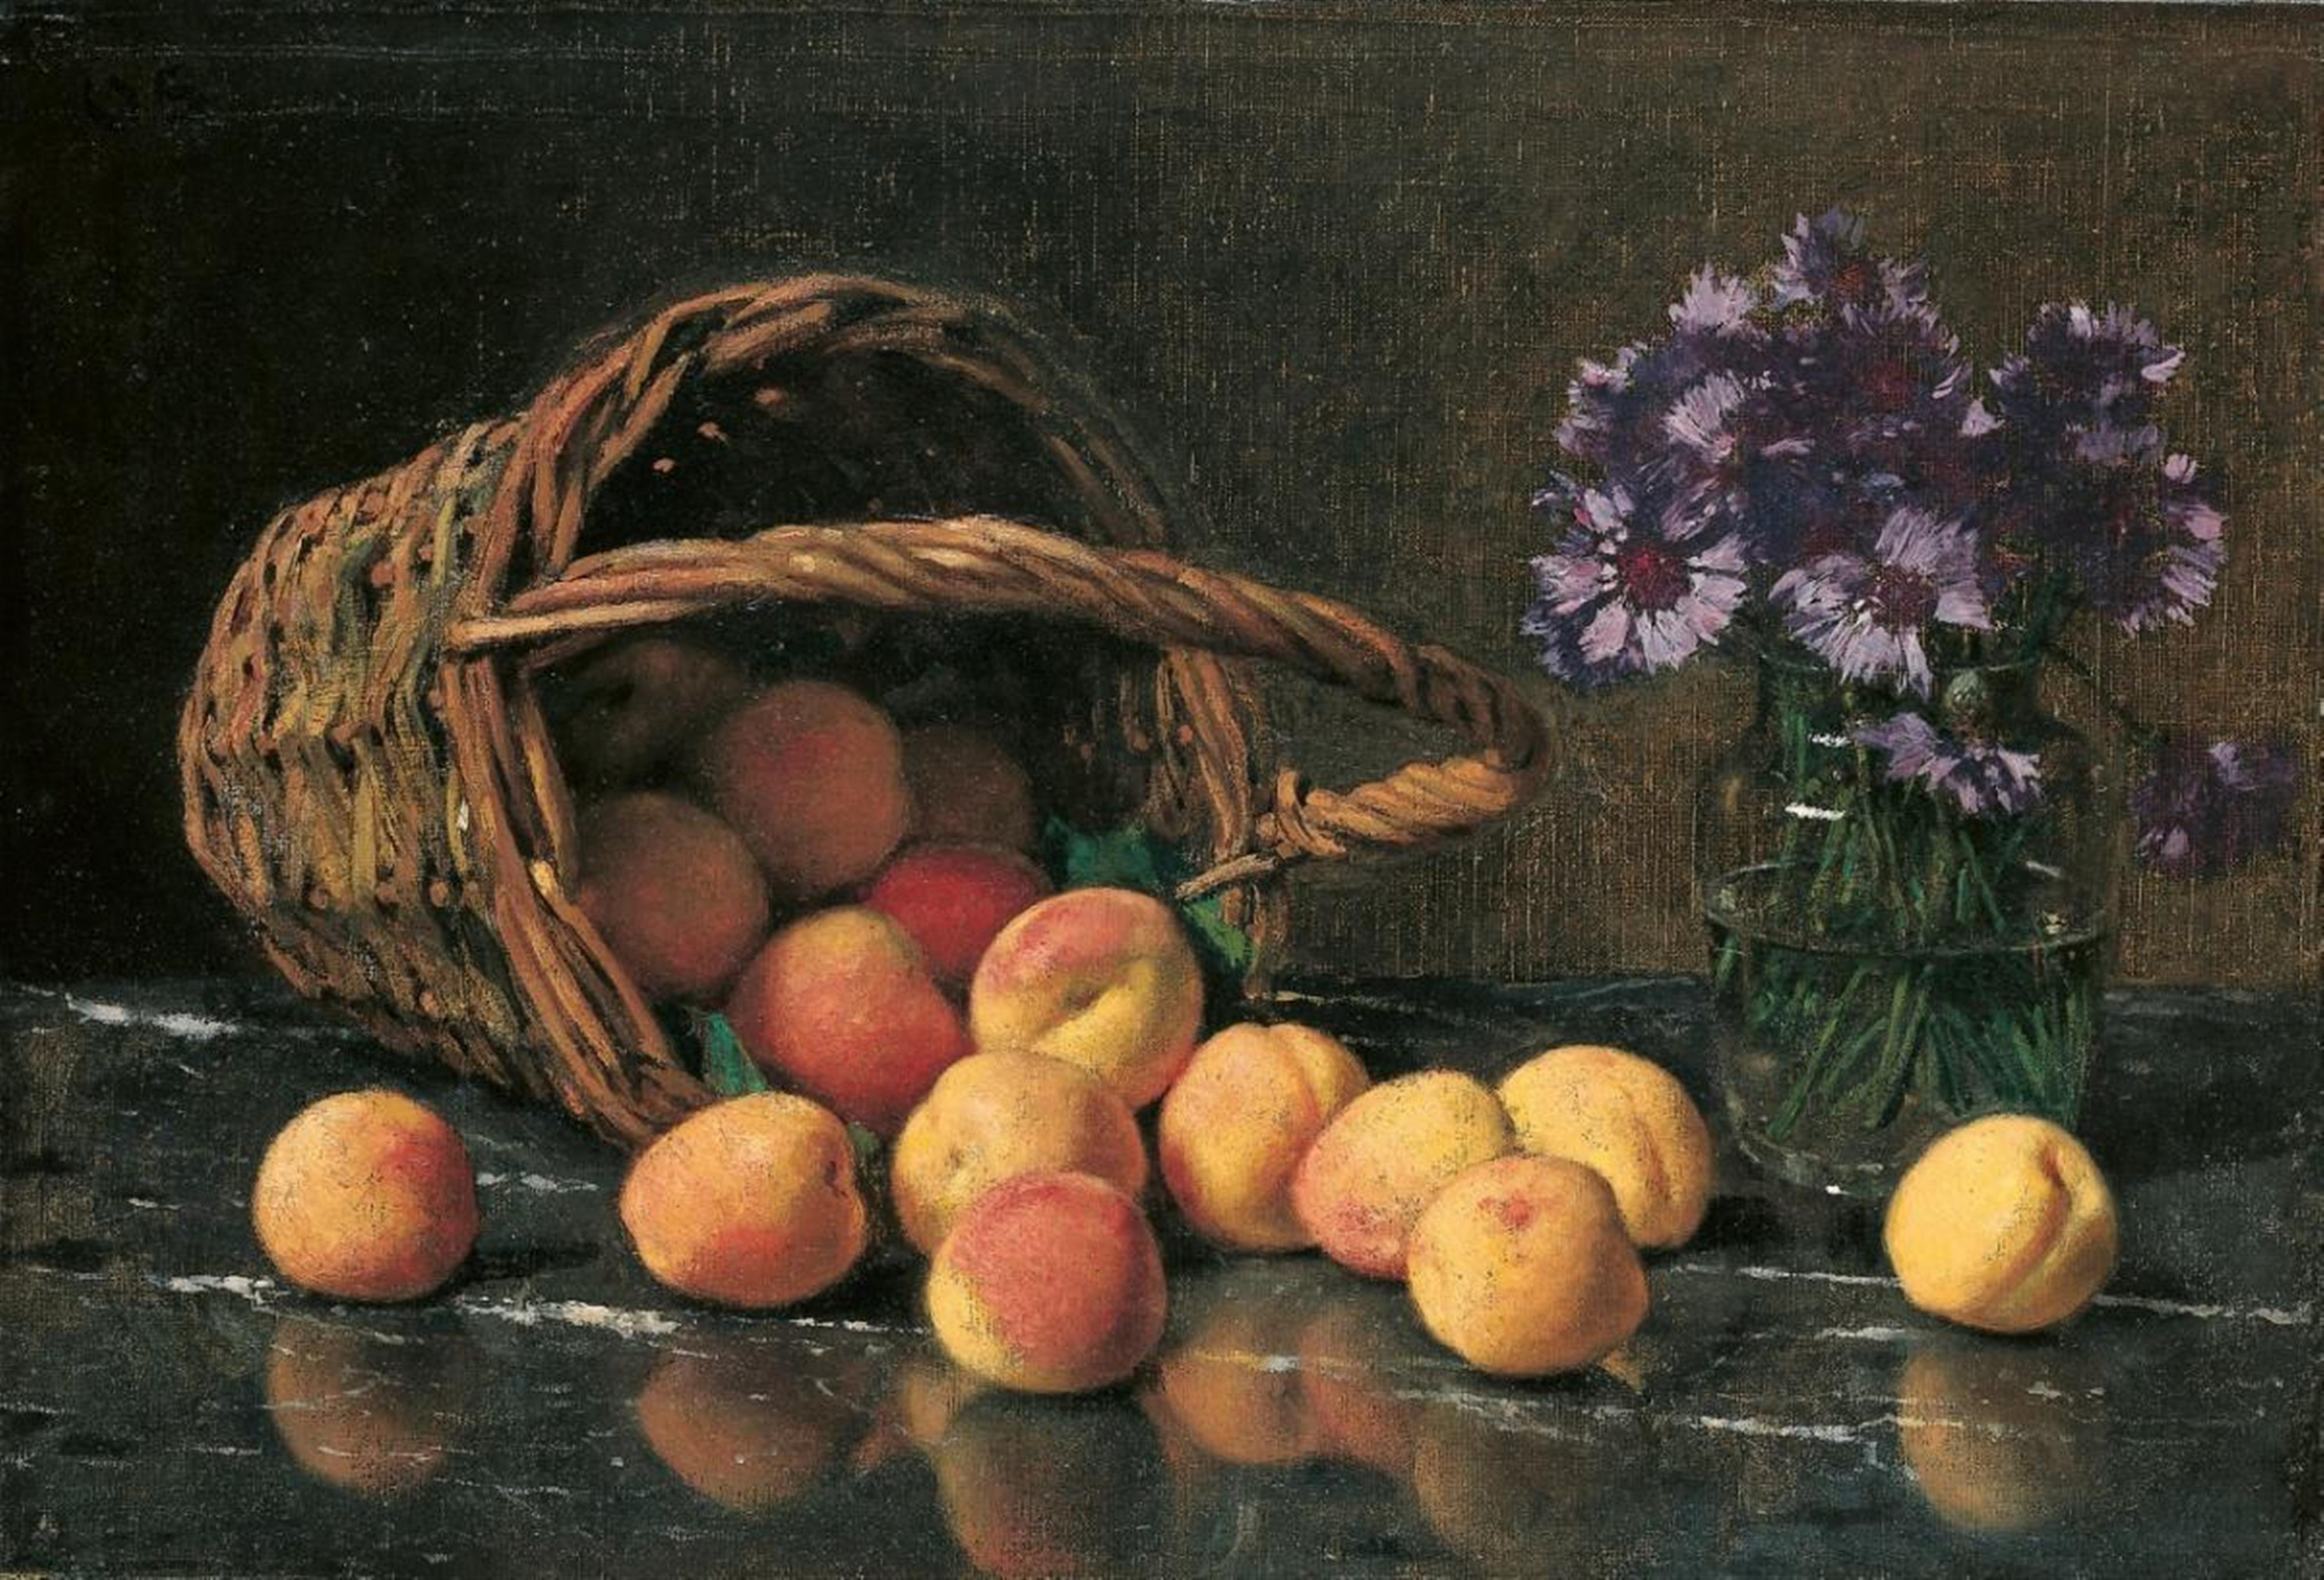 Otto Scholderer - SILL LIFE WITH BASKETT, APRICOTS AND FLOWERS - image-1